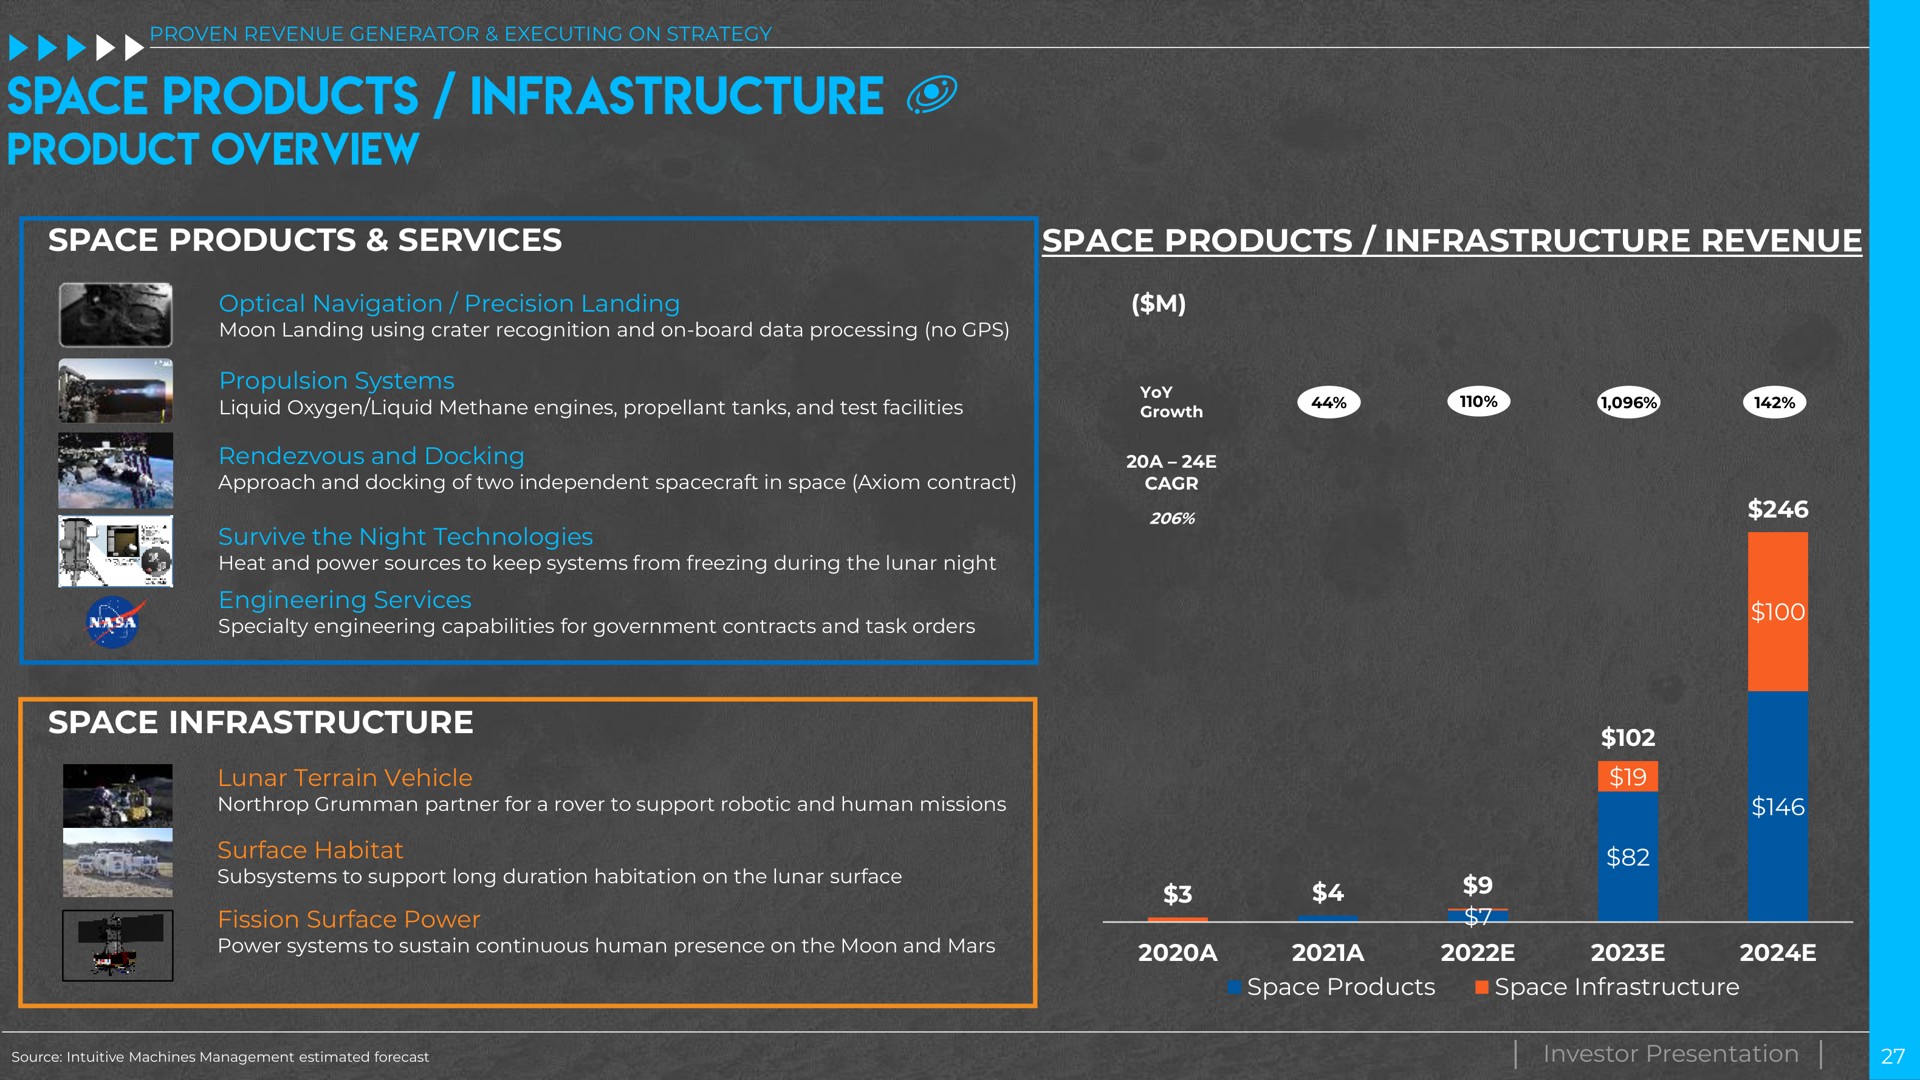 space products services space products infrastructure revenue optical navigation precision landing propulsion systems rendezvous and docking survive the night technologies engineering services space infrastructure lunar terrain vehicle surface habitat fission surface power a a space products investor presentation space infrastructure product overview saa | Intuitive Machines